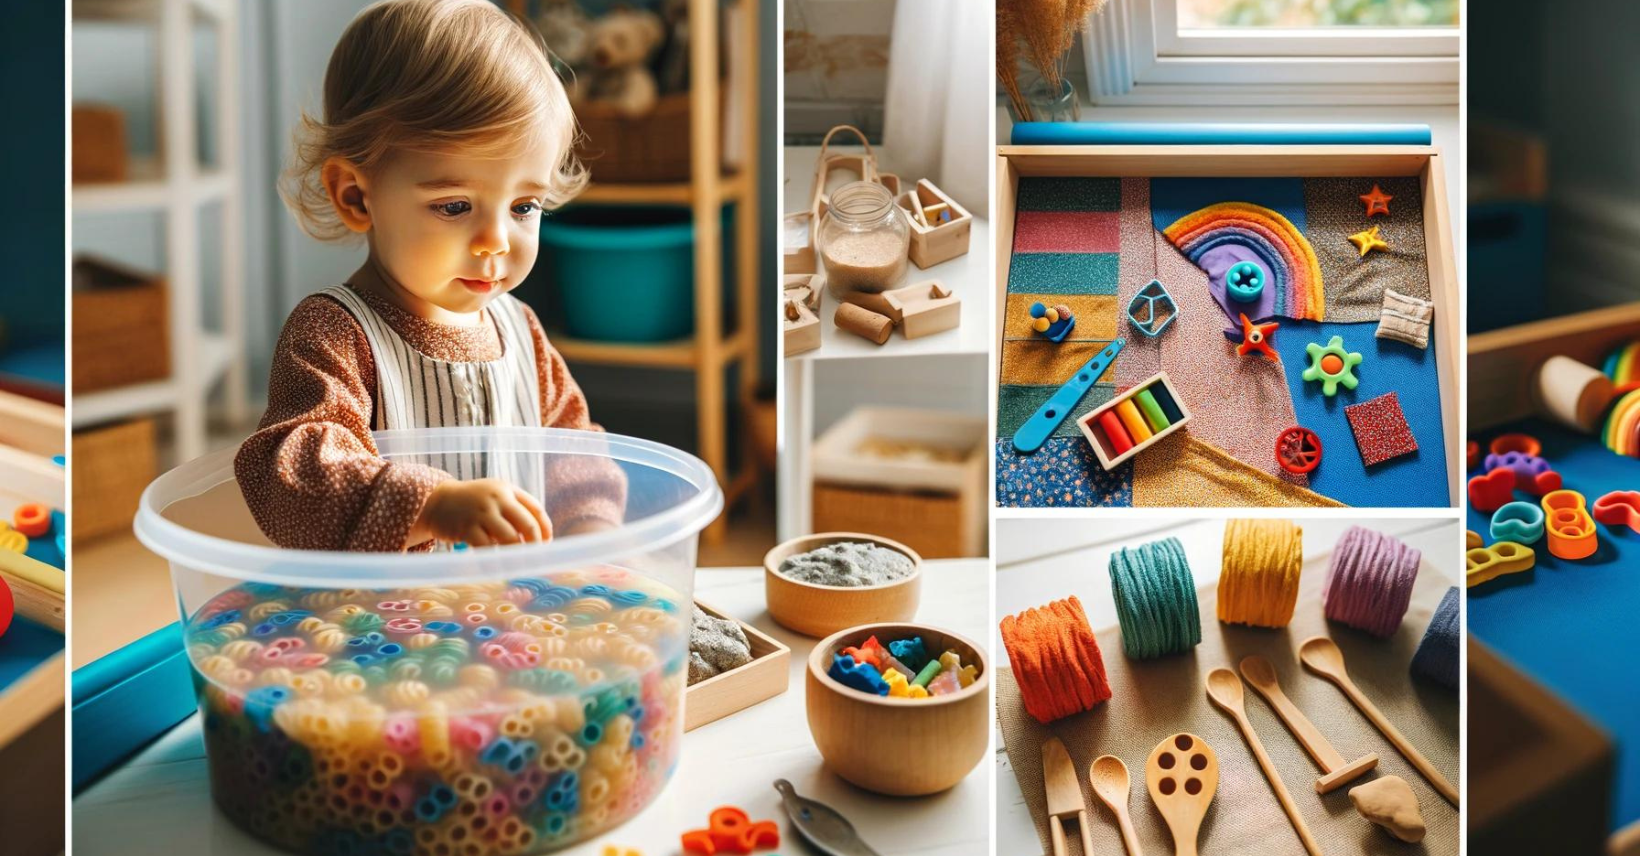 Montessori Activities for 1 Year Olds